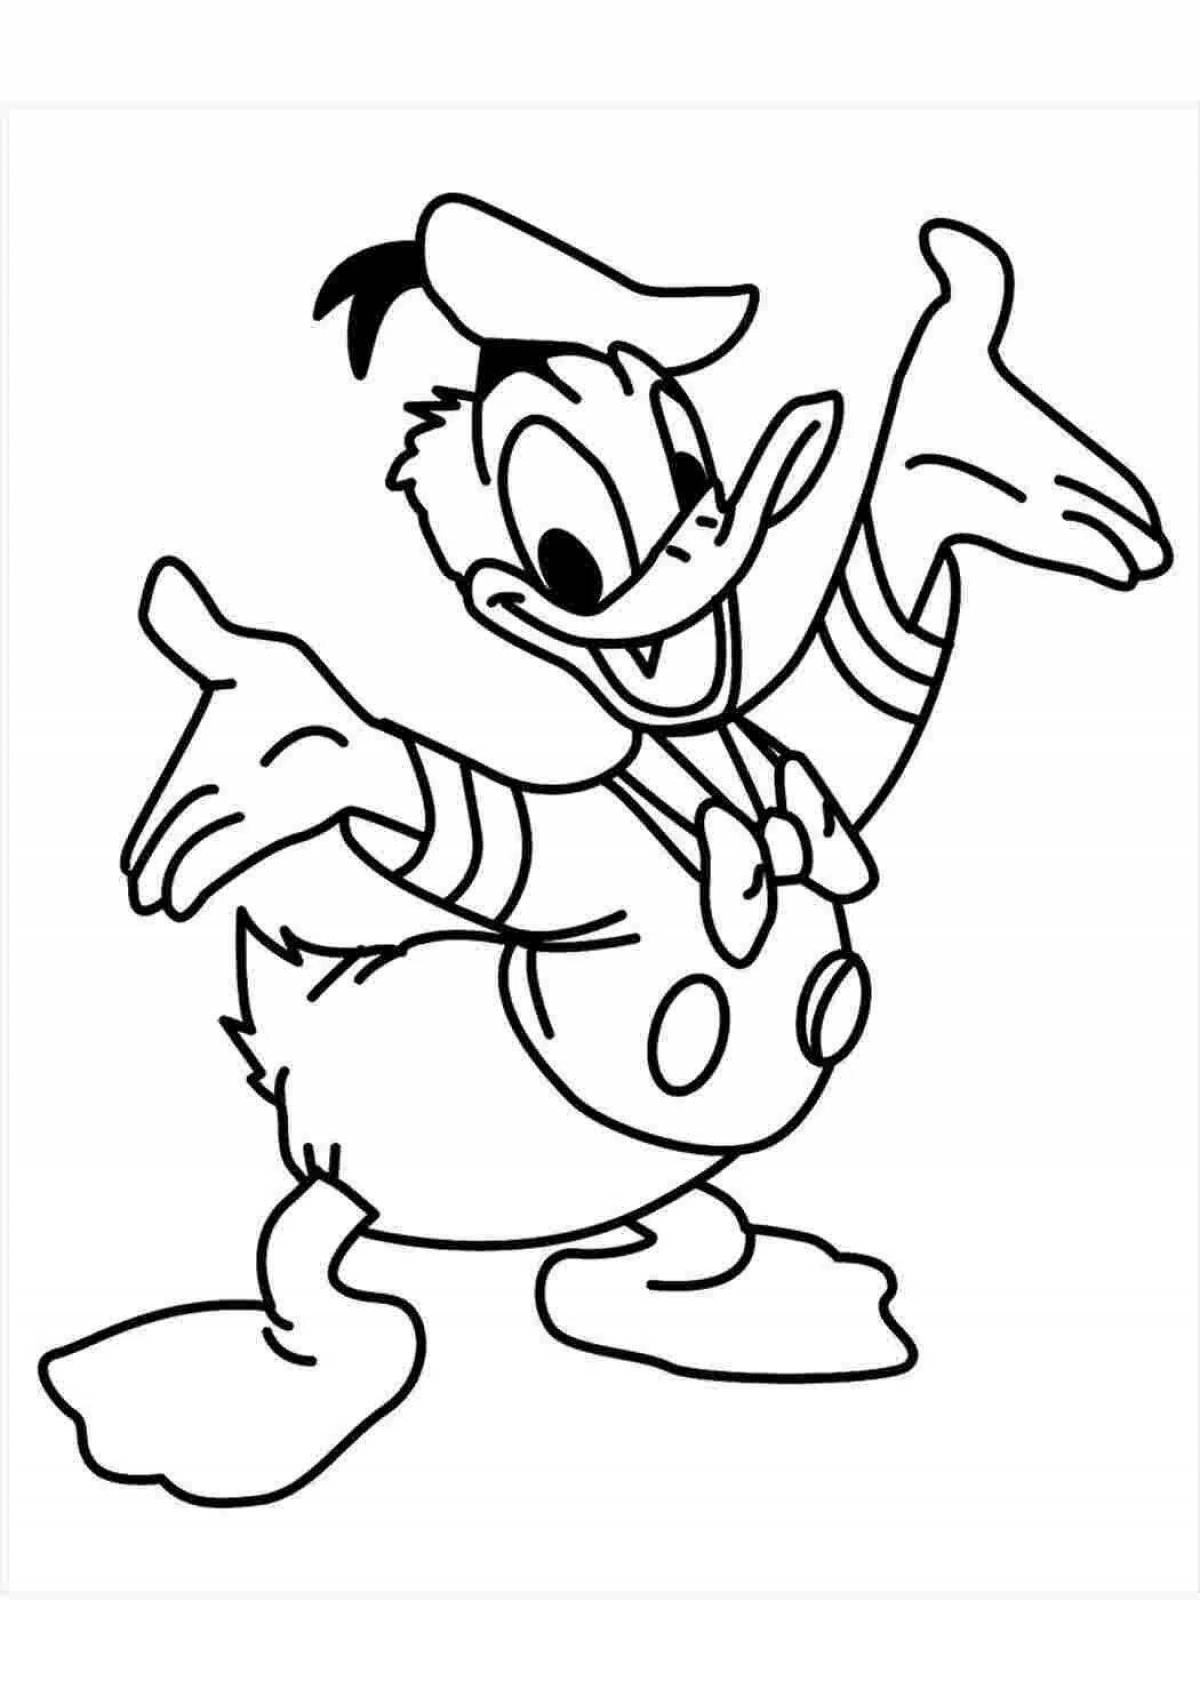 Outstanding twist mcduck coloring page